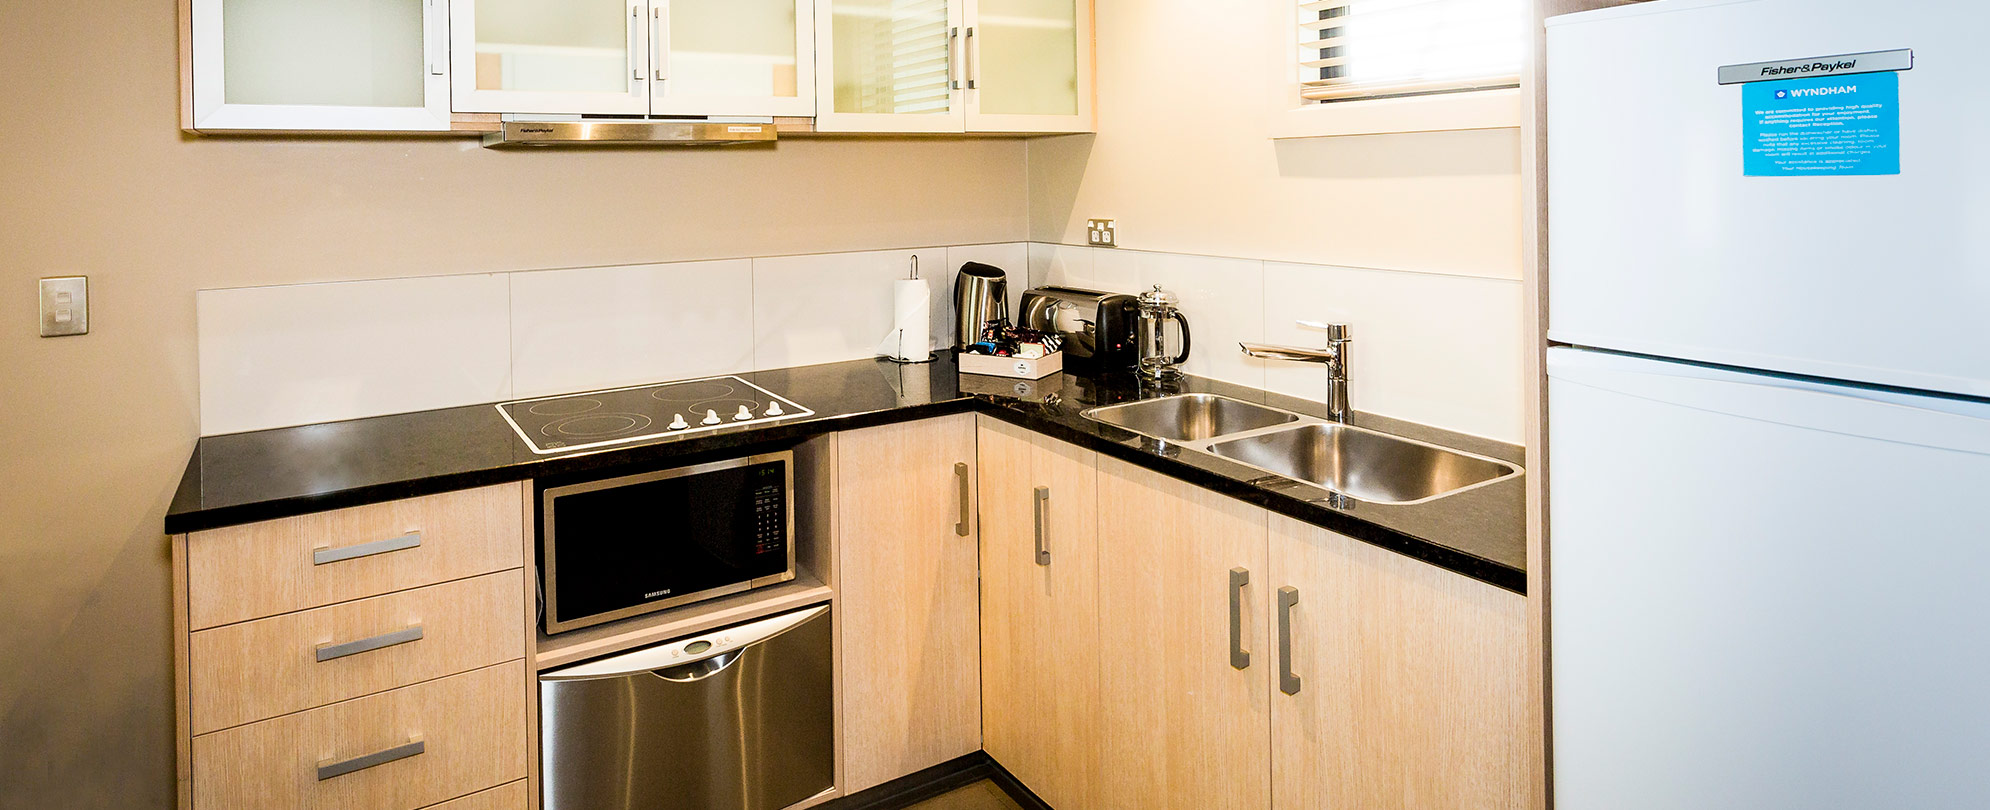 The kitchen of a 3-bedroom suite at Club Wyndham Wanaka.